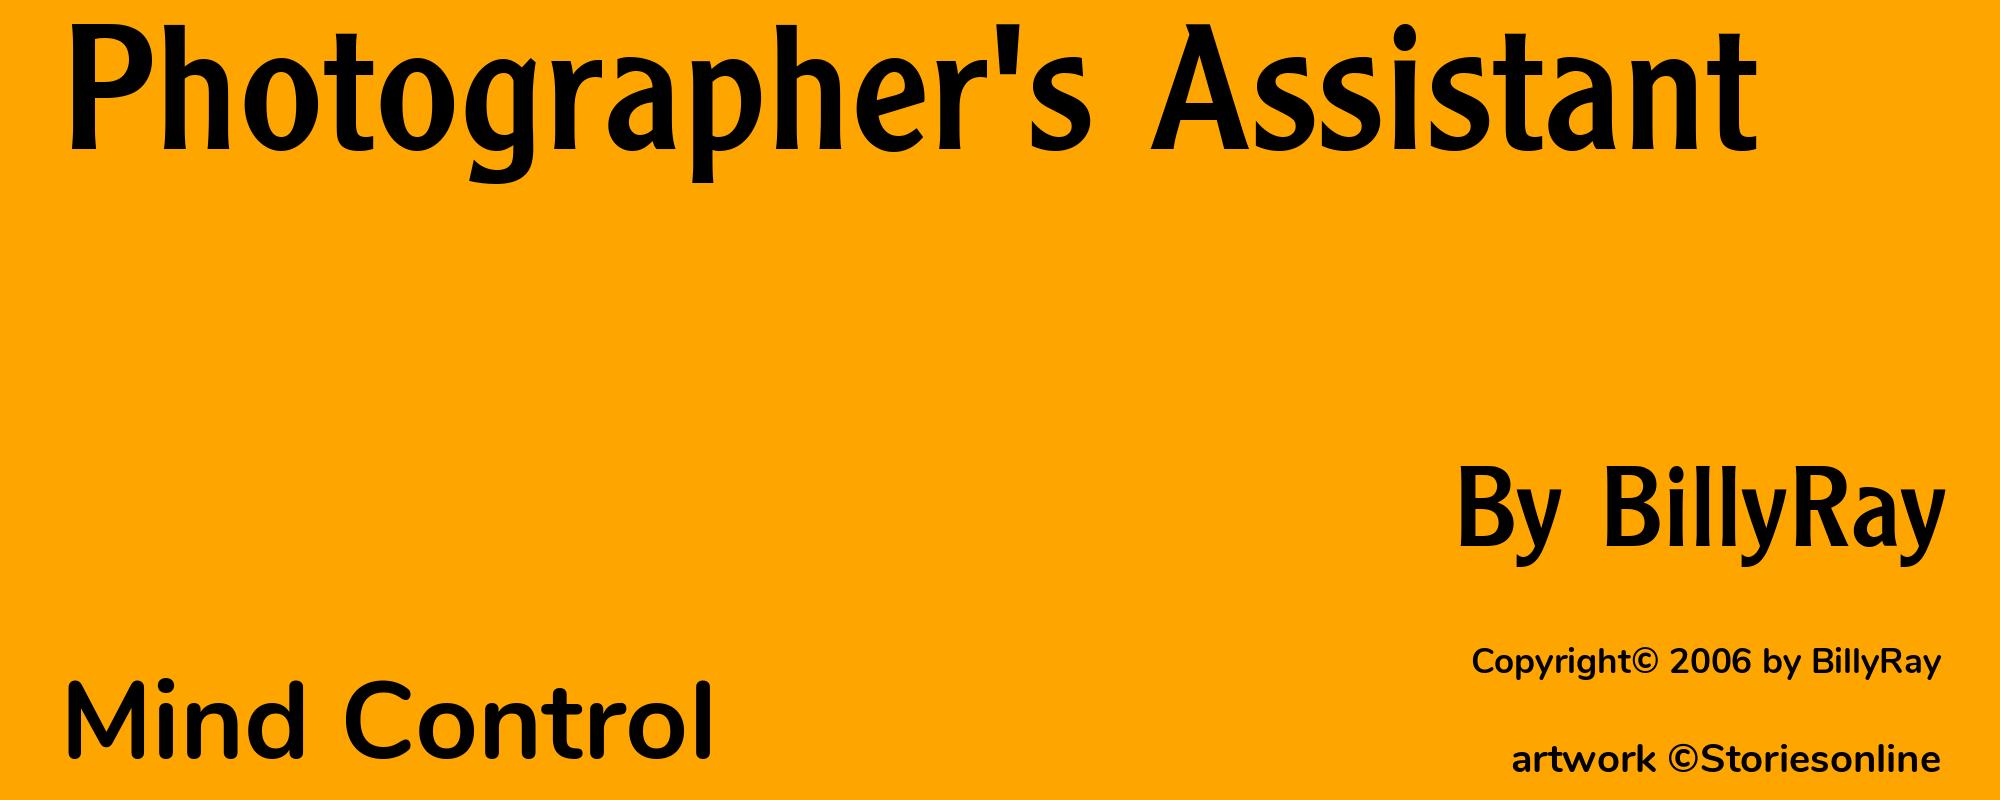 Photographer's Assistant - Cover